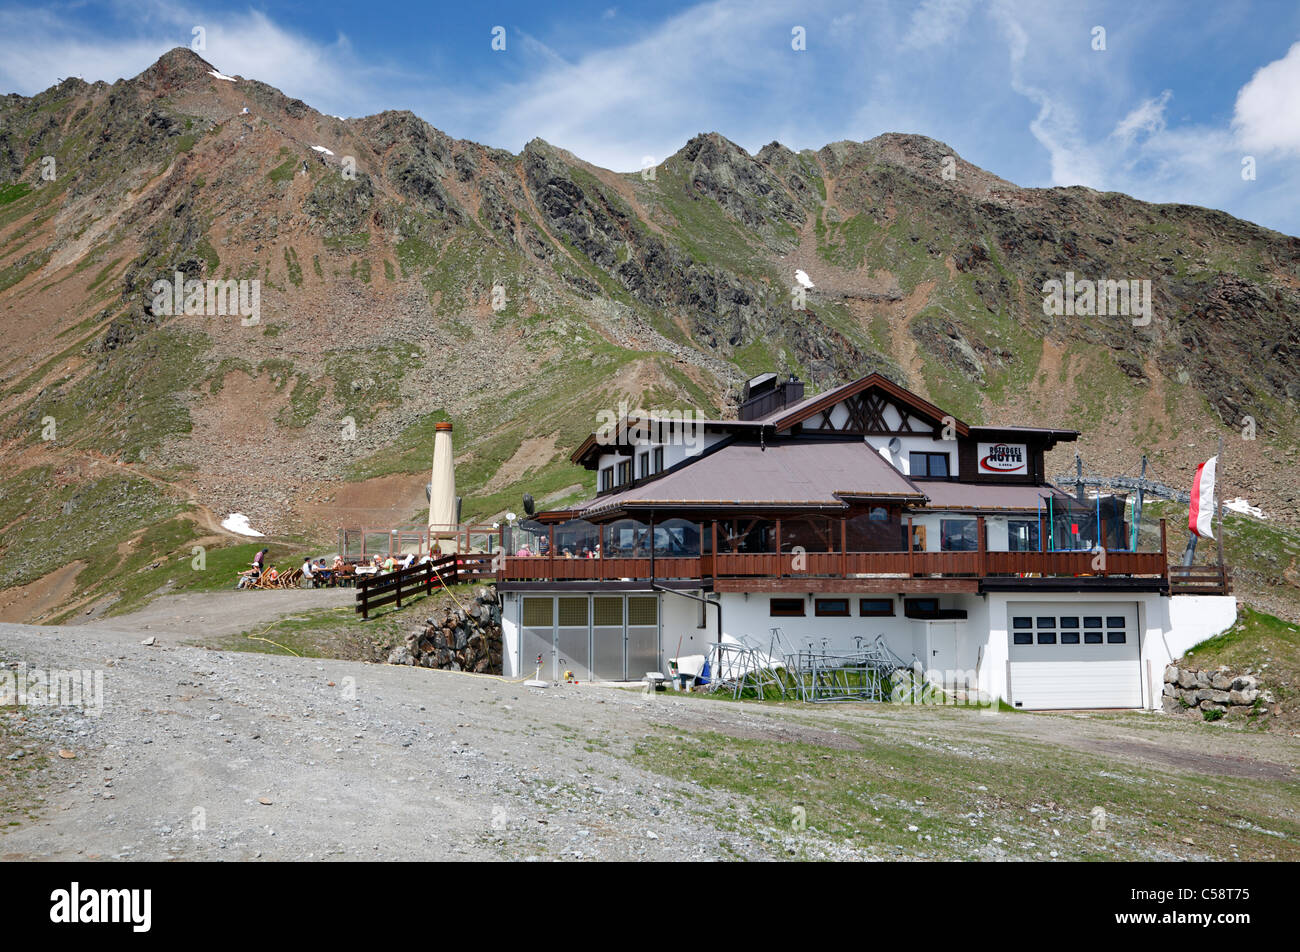 Rotkogel Mountain Hut in the mountains close to the Rettenbach glacier on the mountain trekking trail from Rettenbach to Sölden. Stock Photo